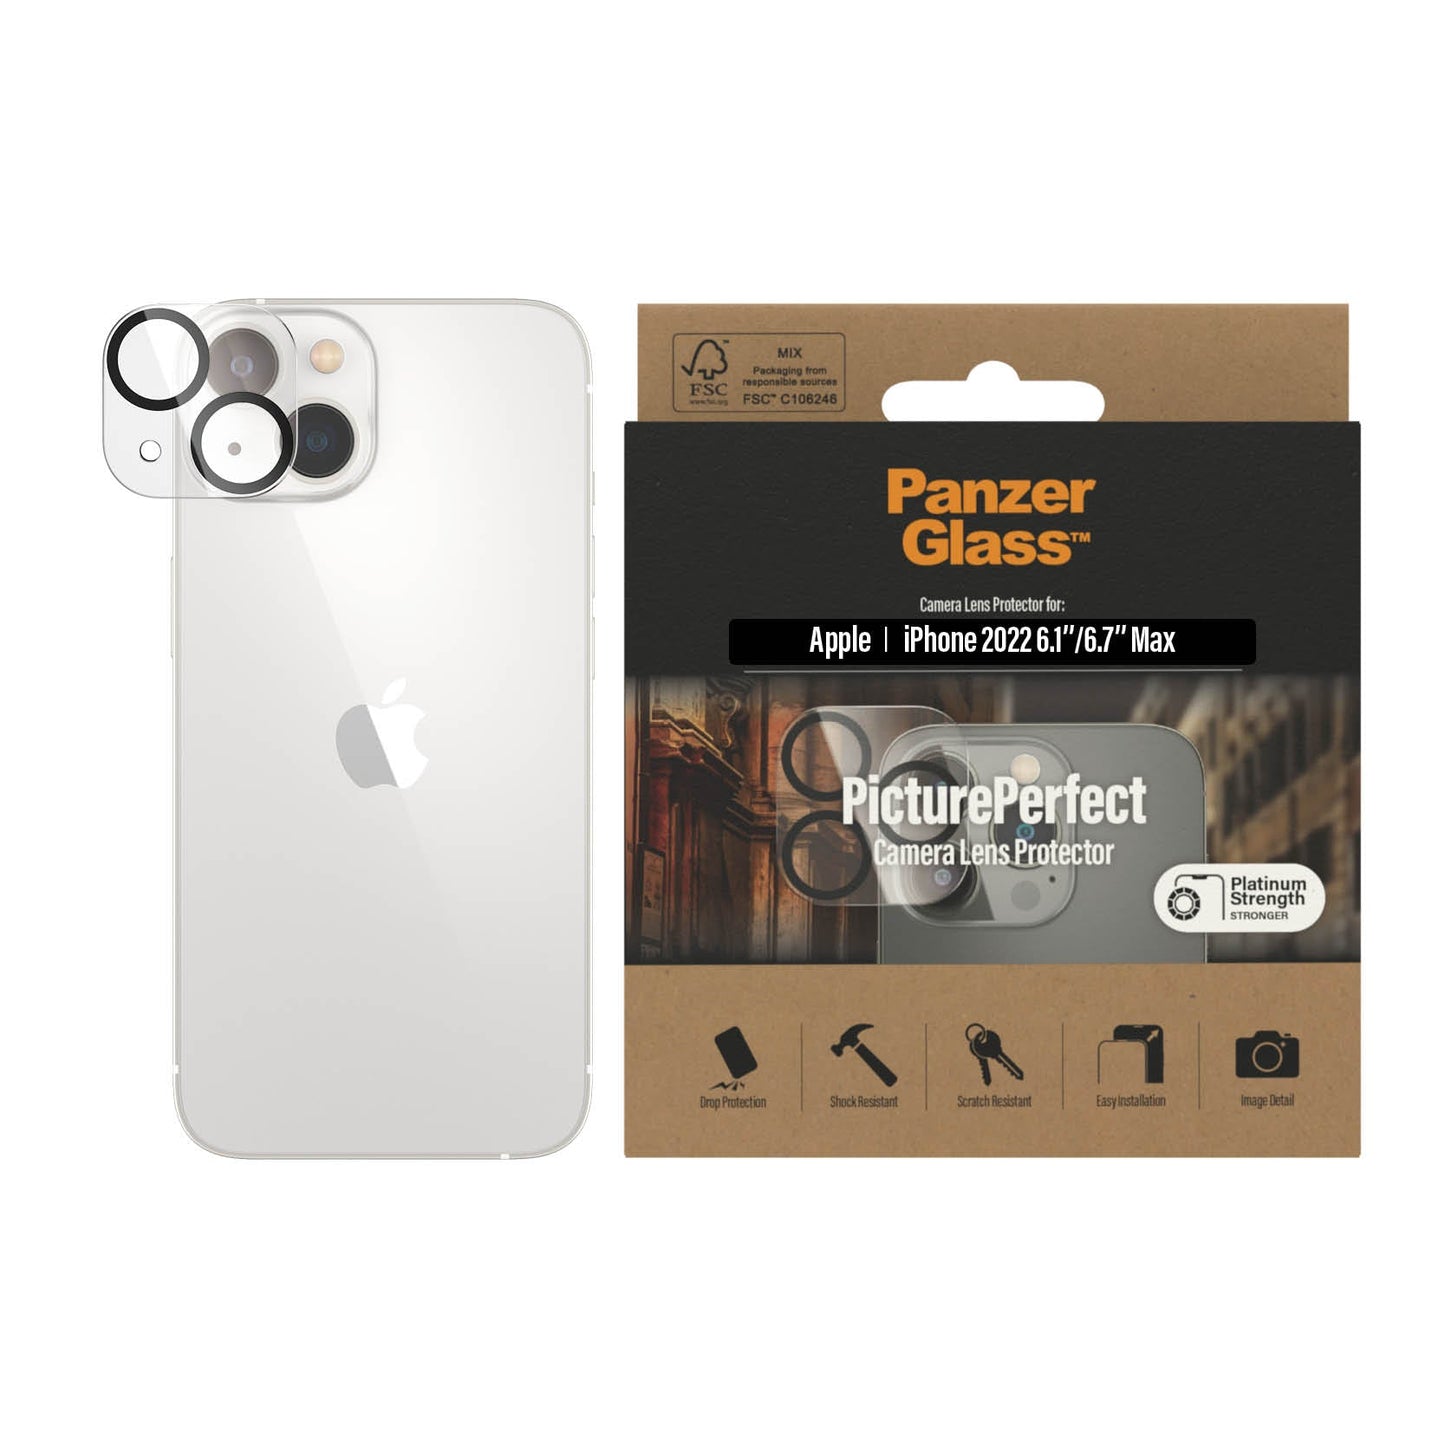 PanzerGlass™ Picture Perfect Camera Lens Protector for iPhone 14 Pro, iPhone 14 Pro Max - Clear